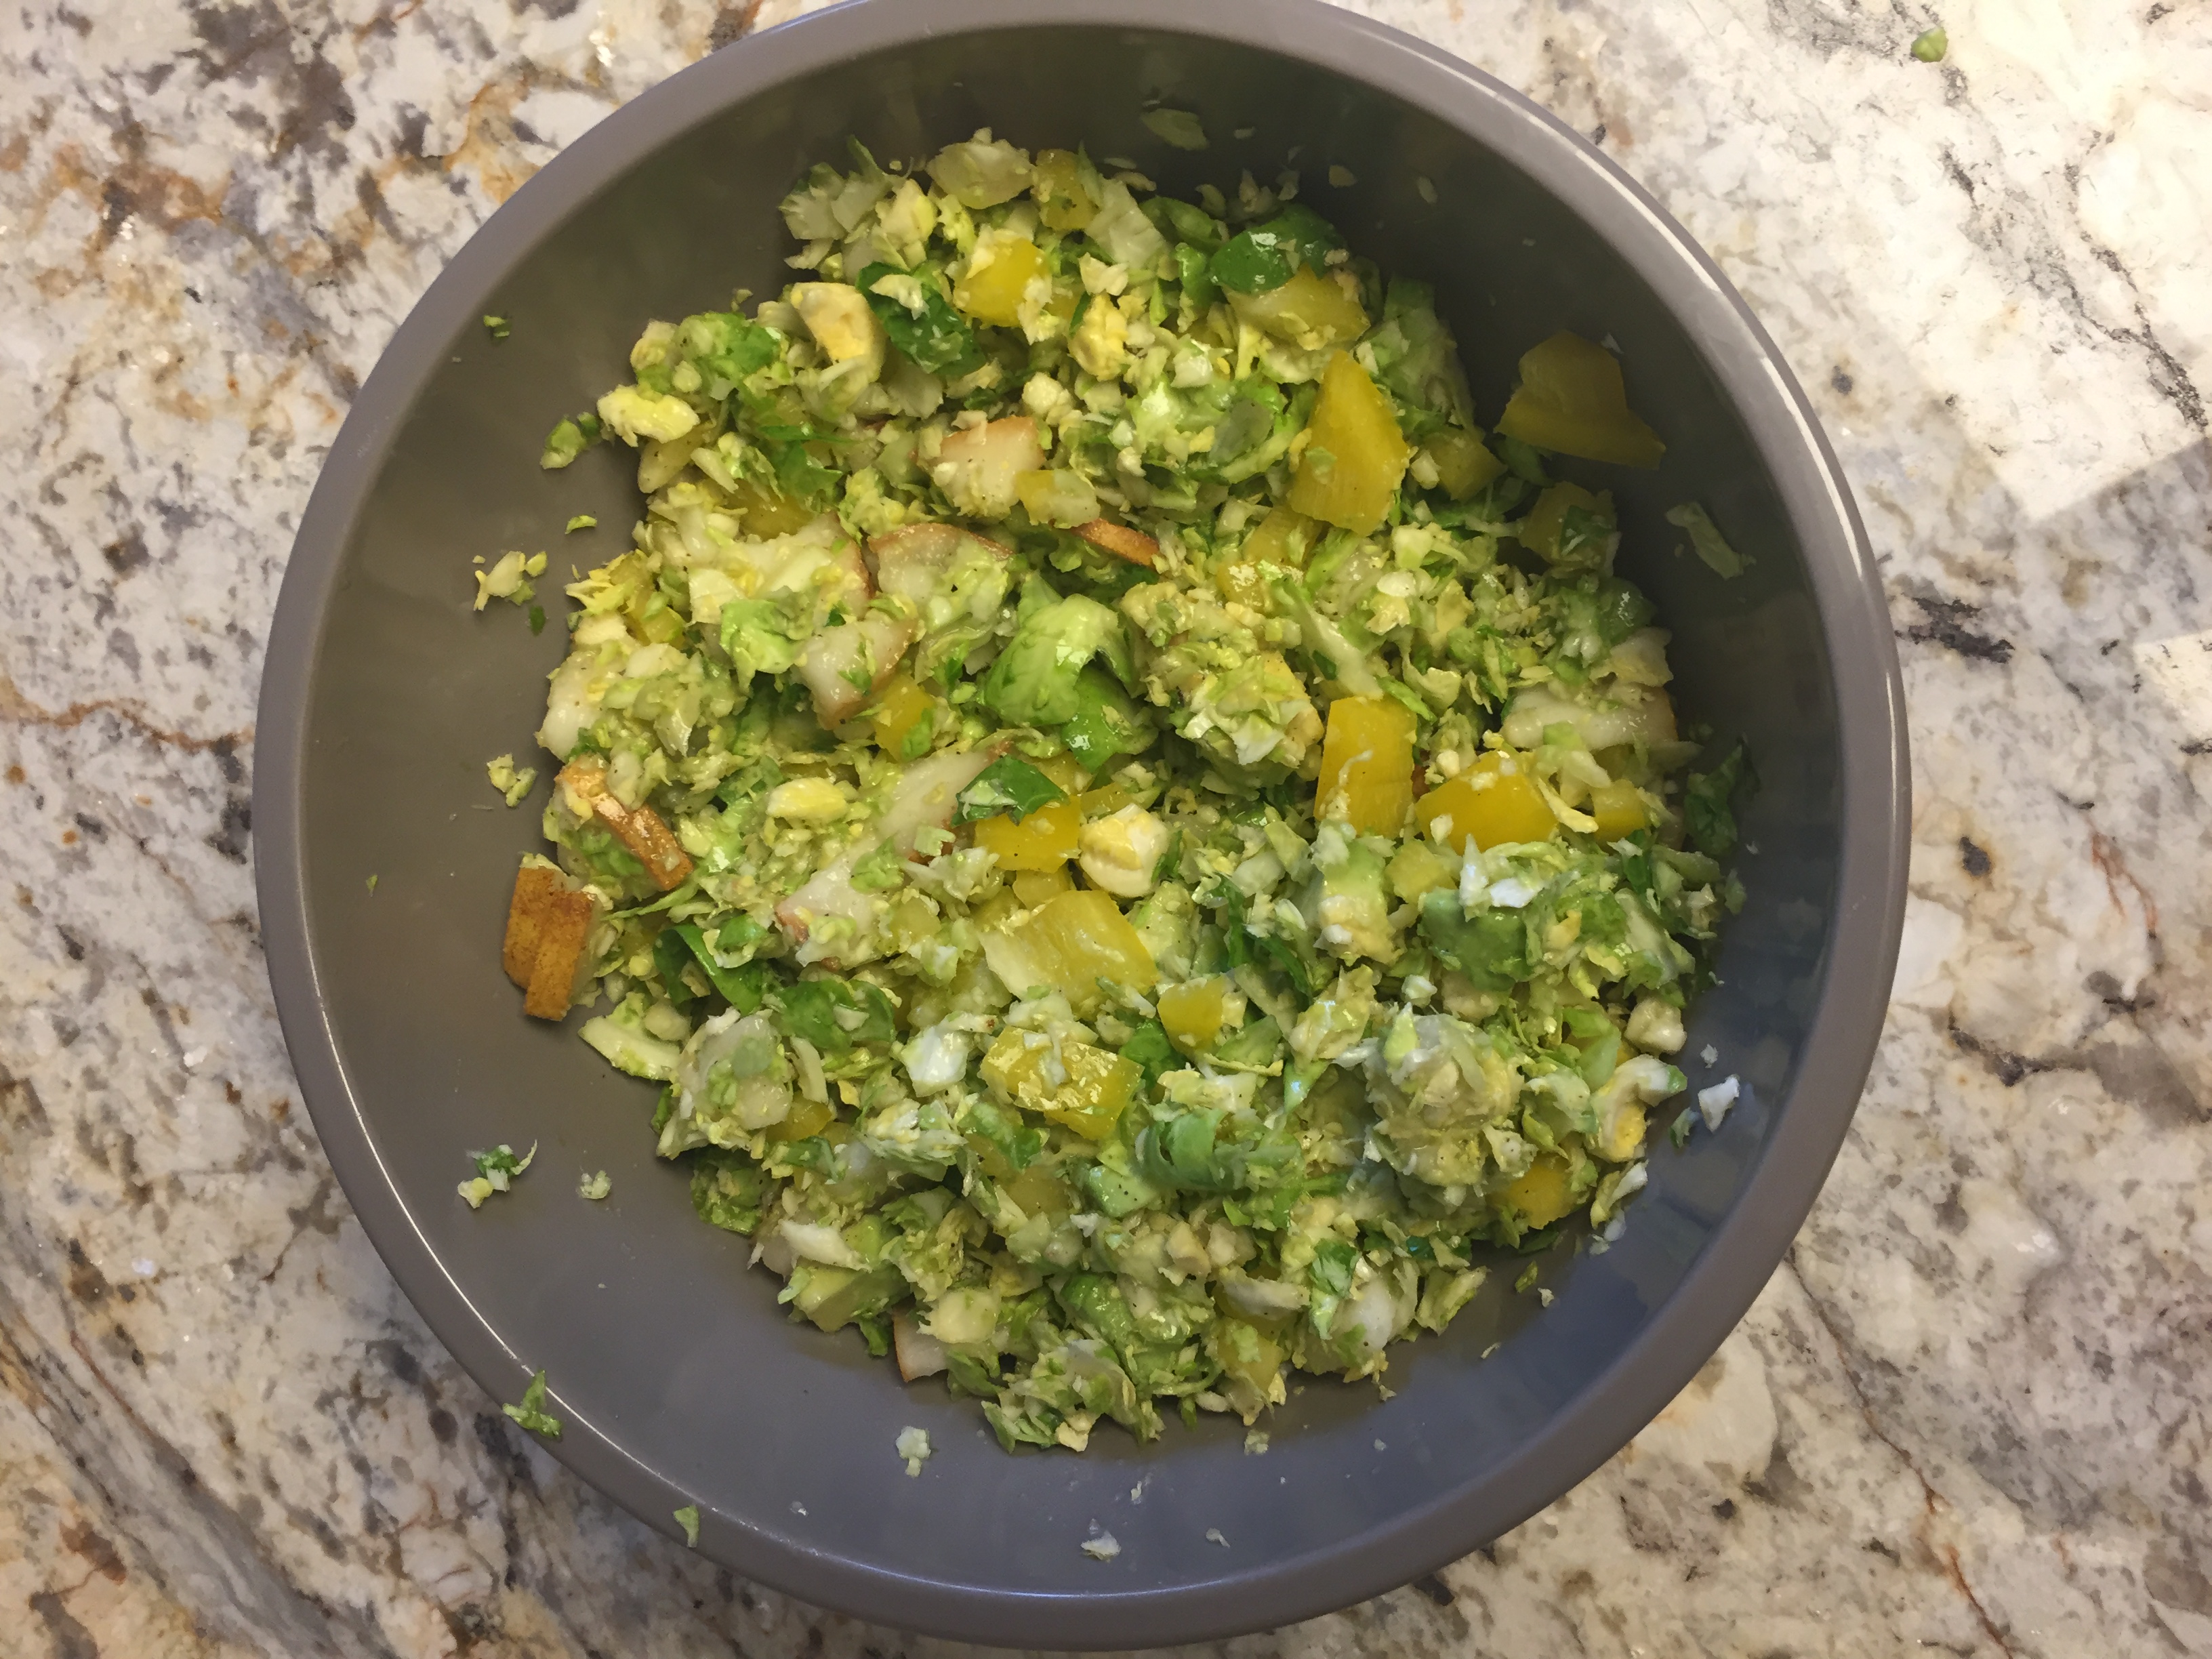 Brussel Sprout Salad